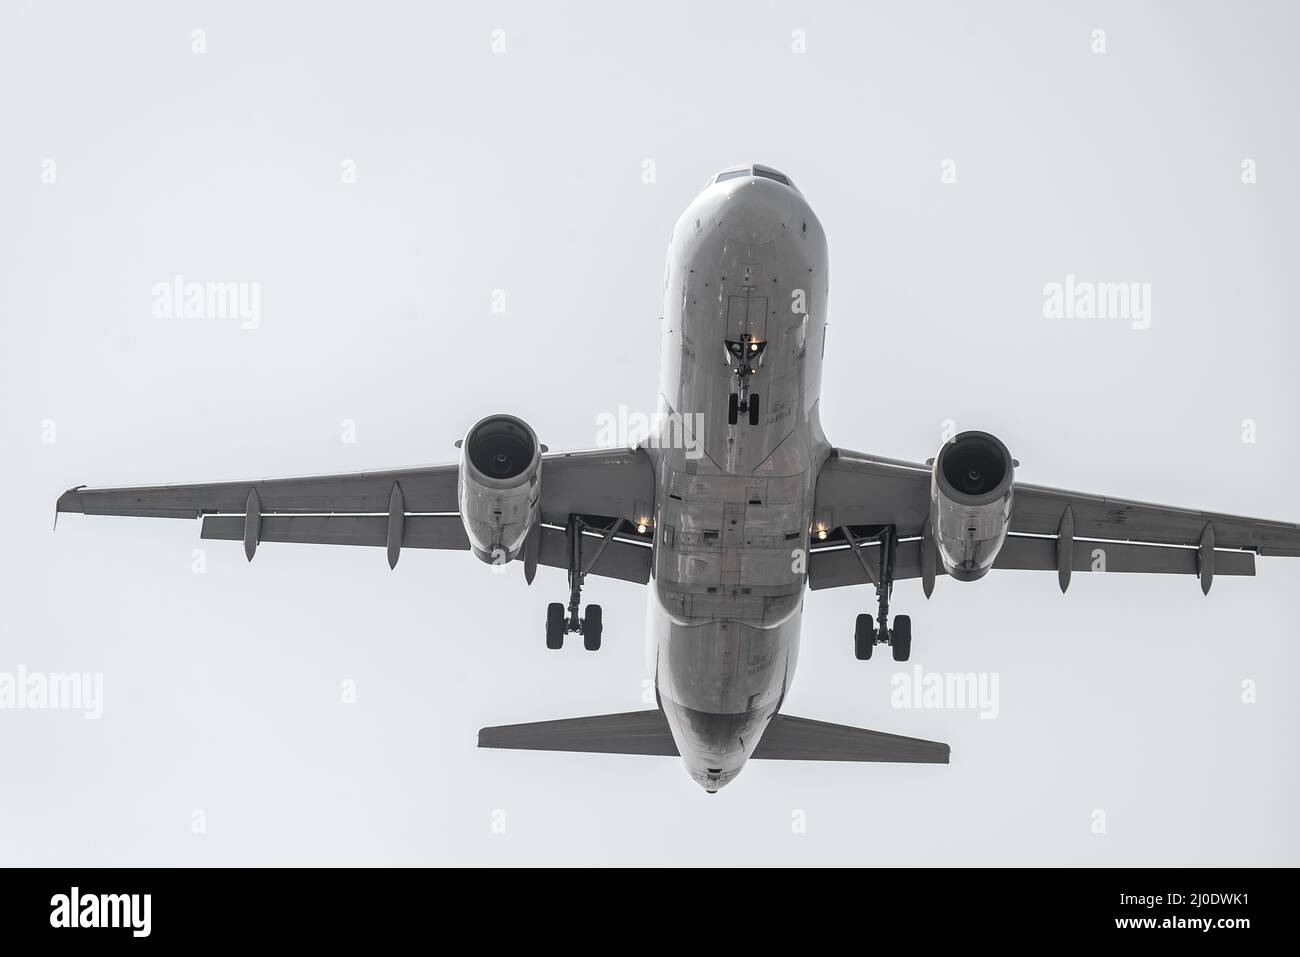 Airplane flying high departing from the airport Stock Photo